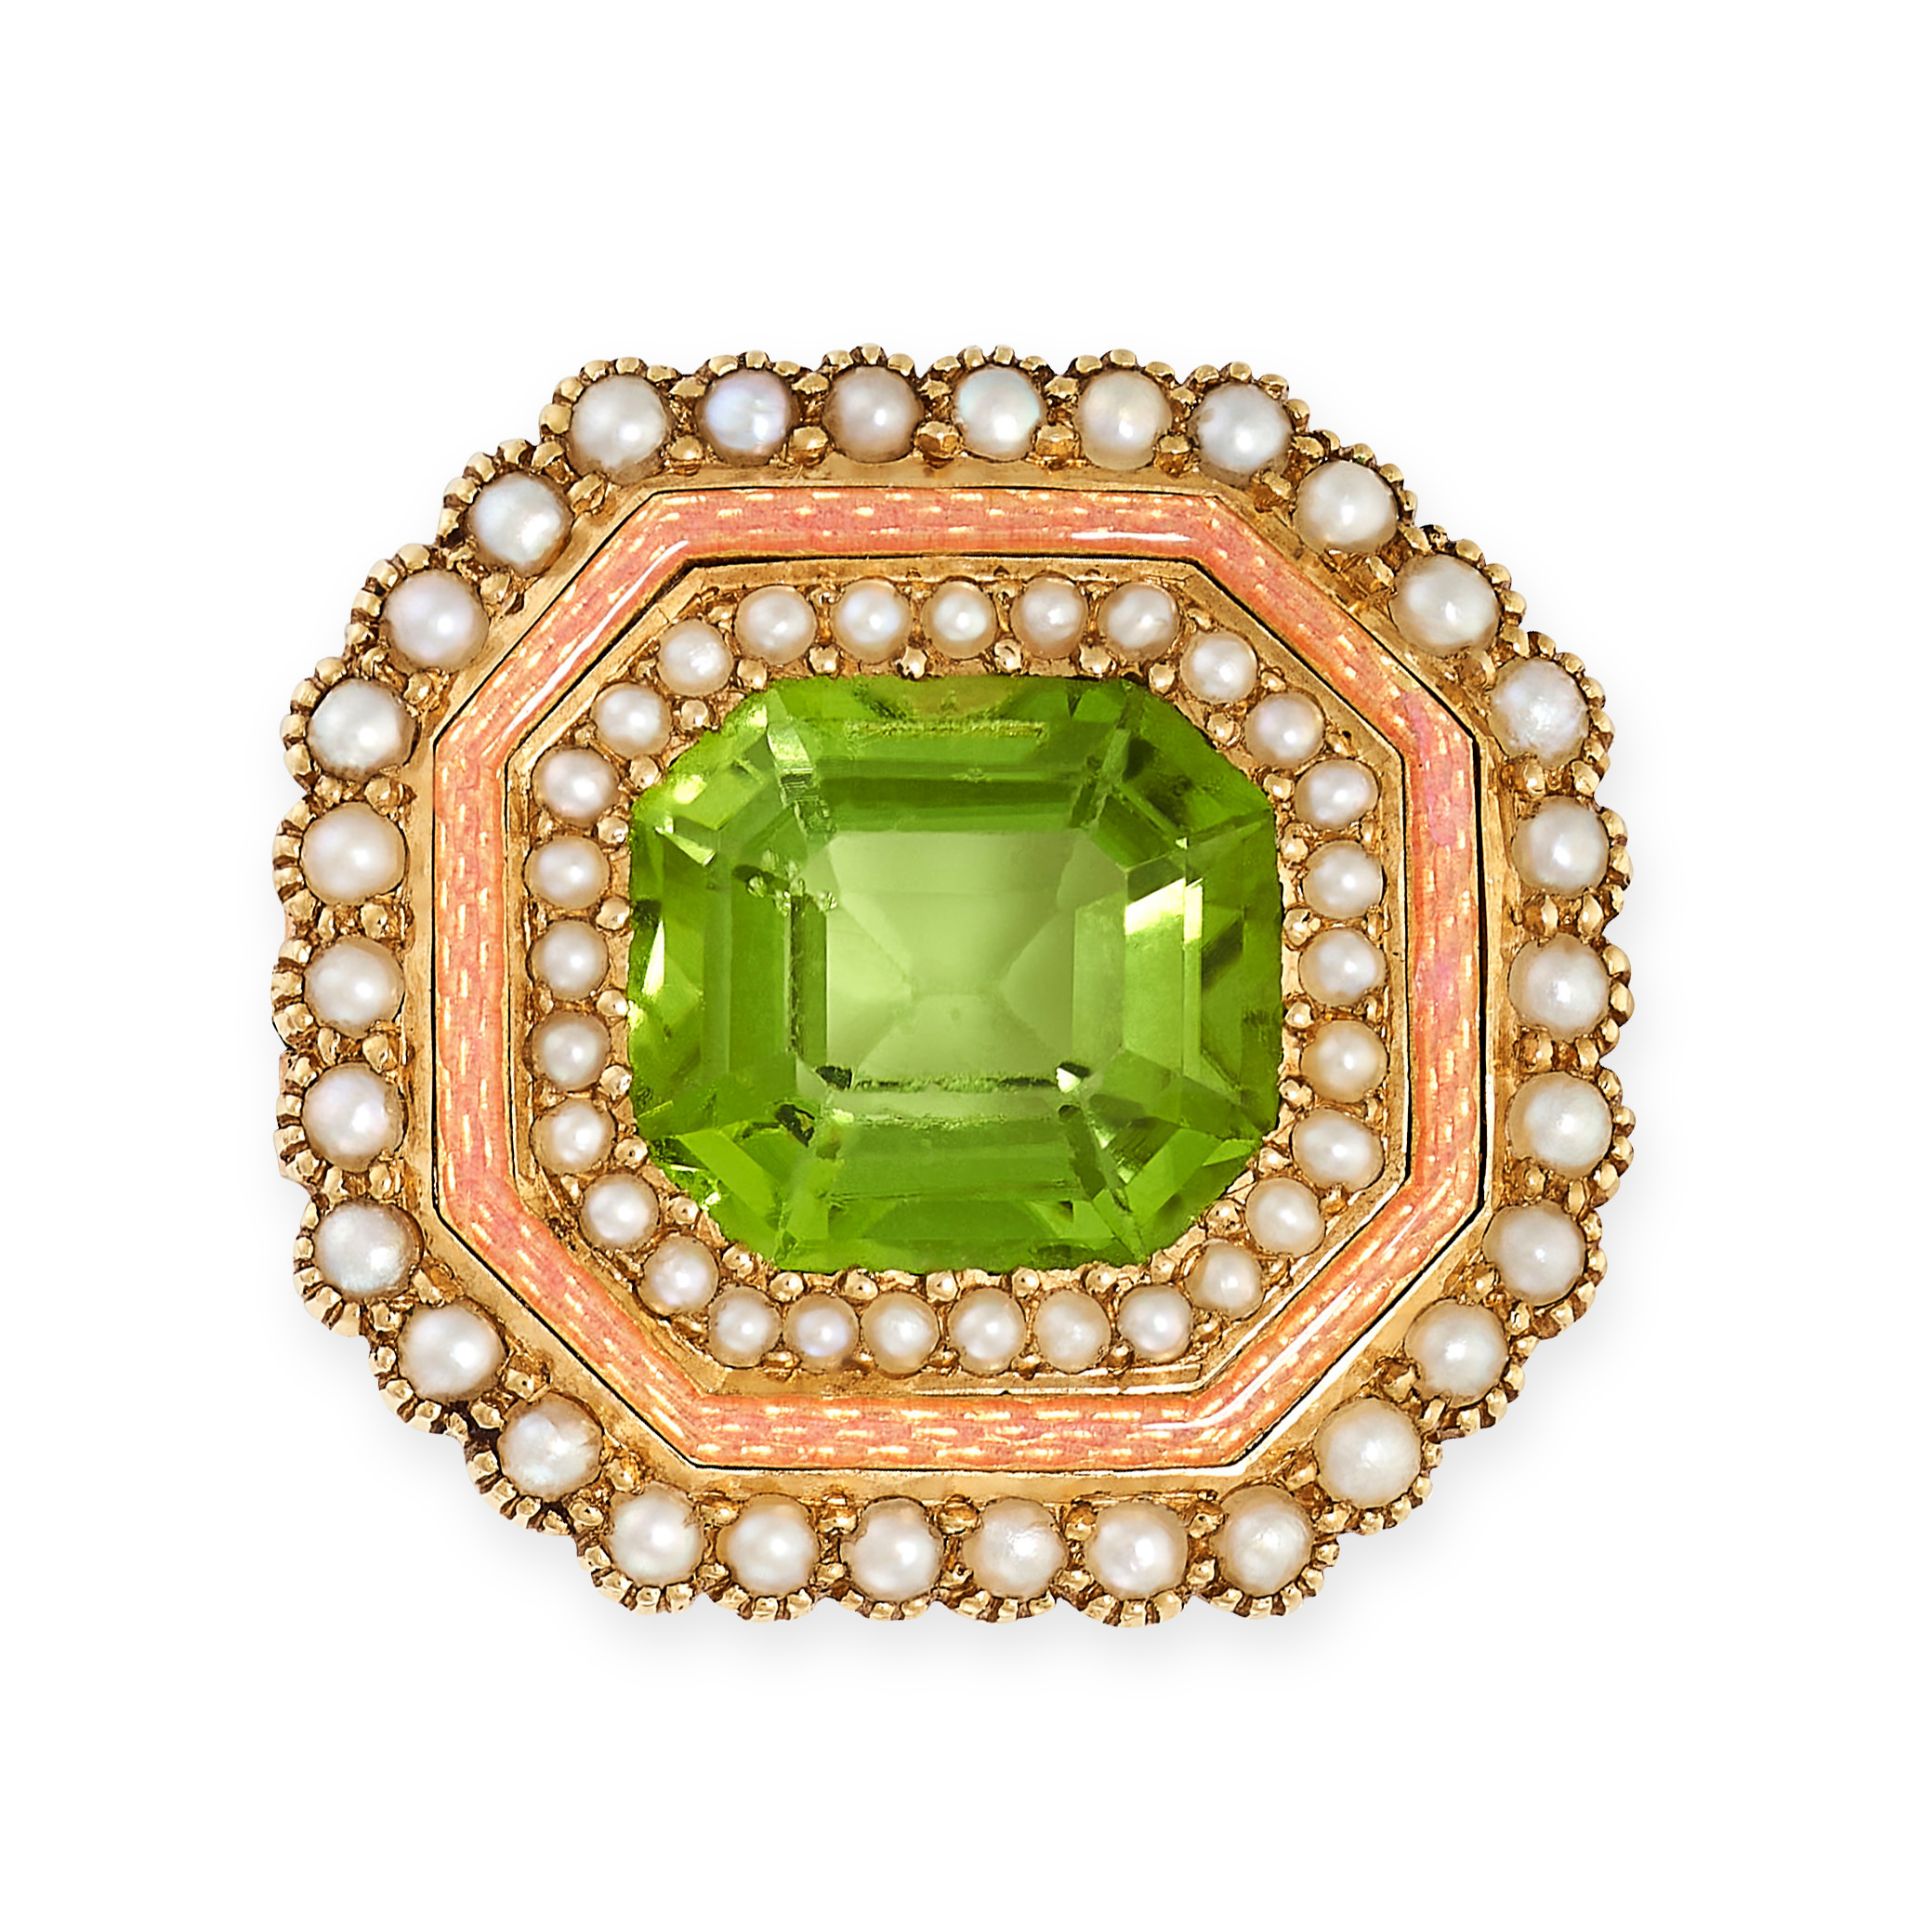 A FINE ANTIQUE PERIDOT, PEARL AND ENAMEL BROOCH in yellow gold, set with an octagonal step cut